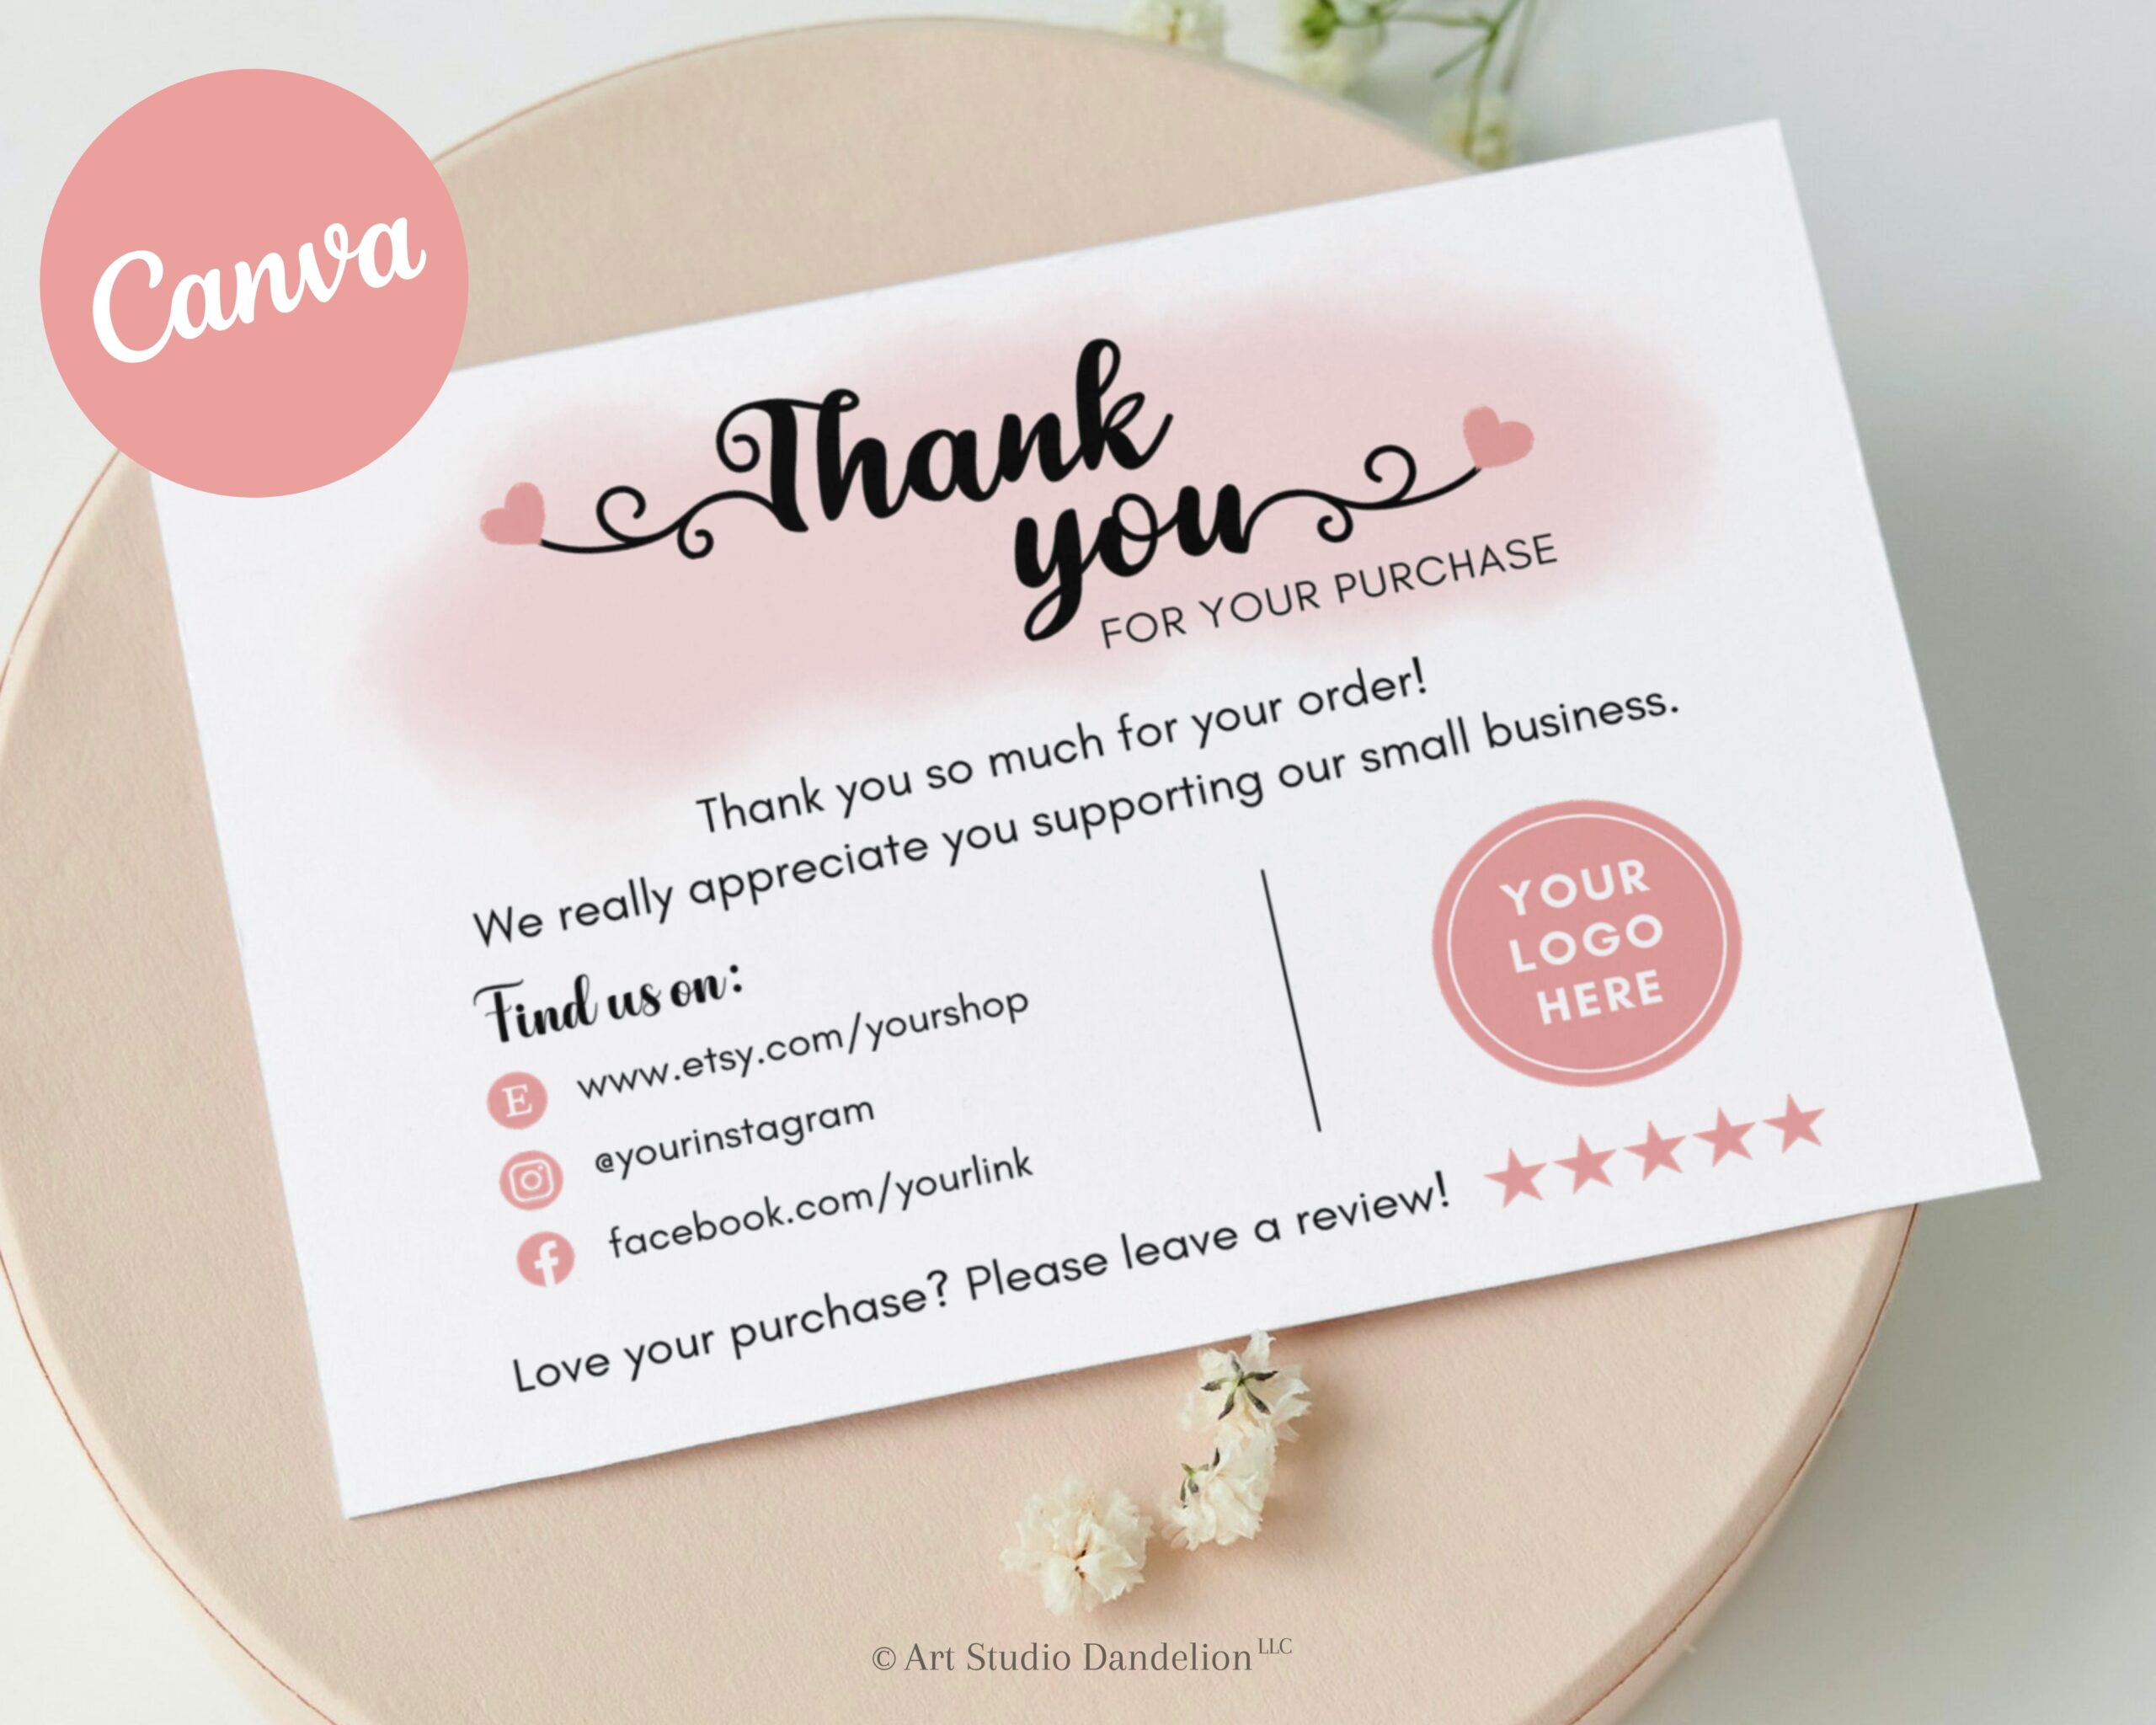 Business Thank You Card Template Small Business Card - Canva Thank You For Your Purchase Editable Card Template - Print-Ready Instant Access